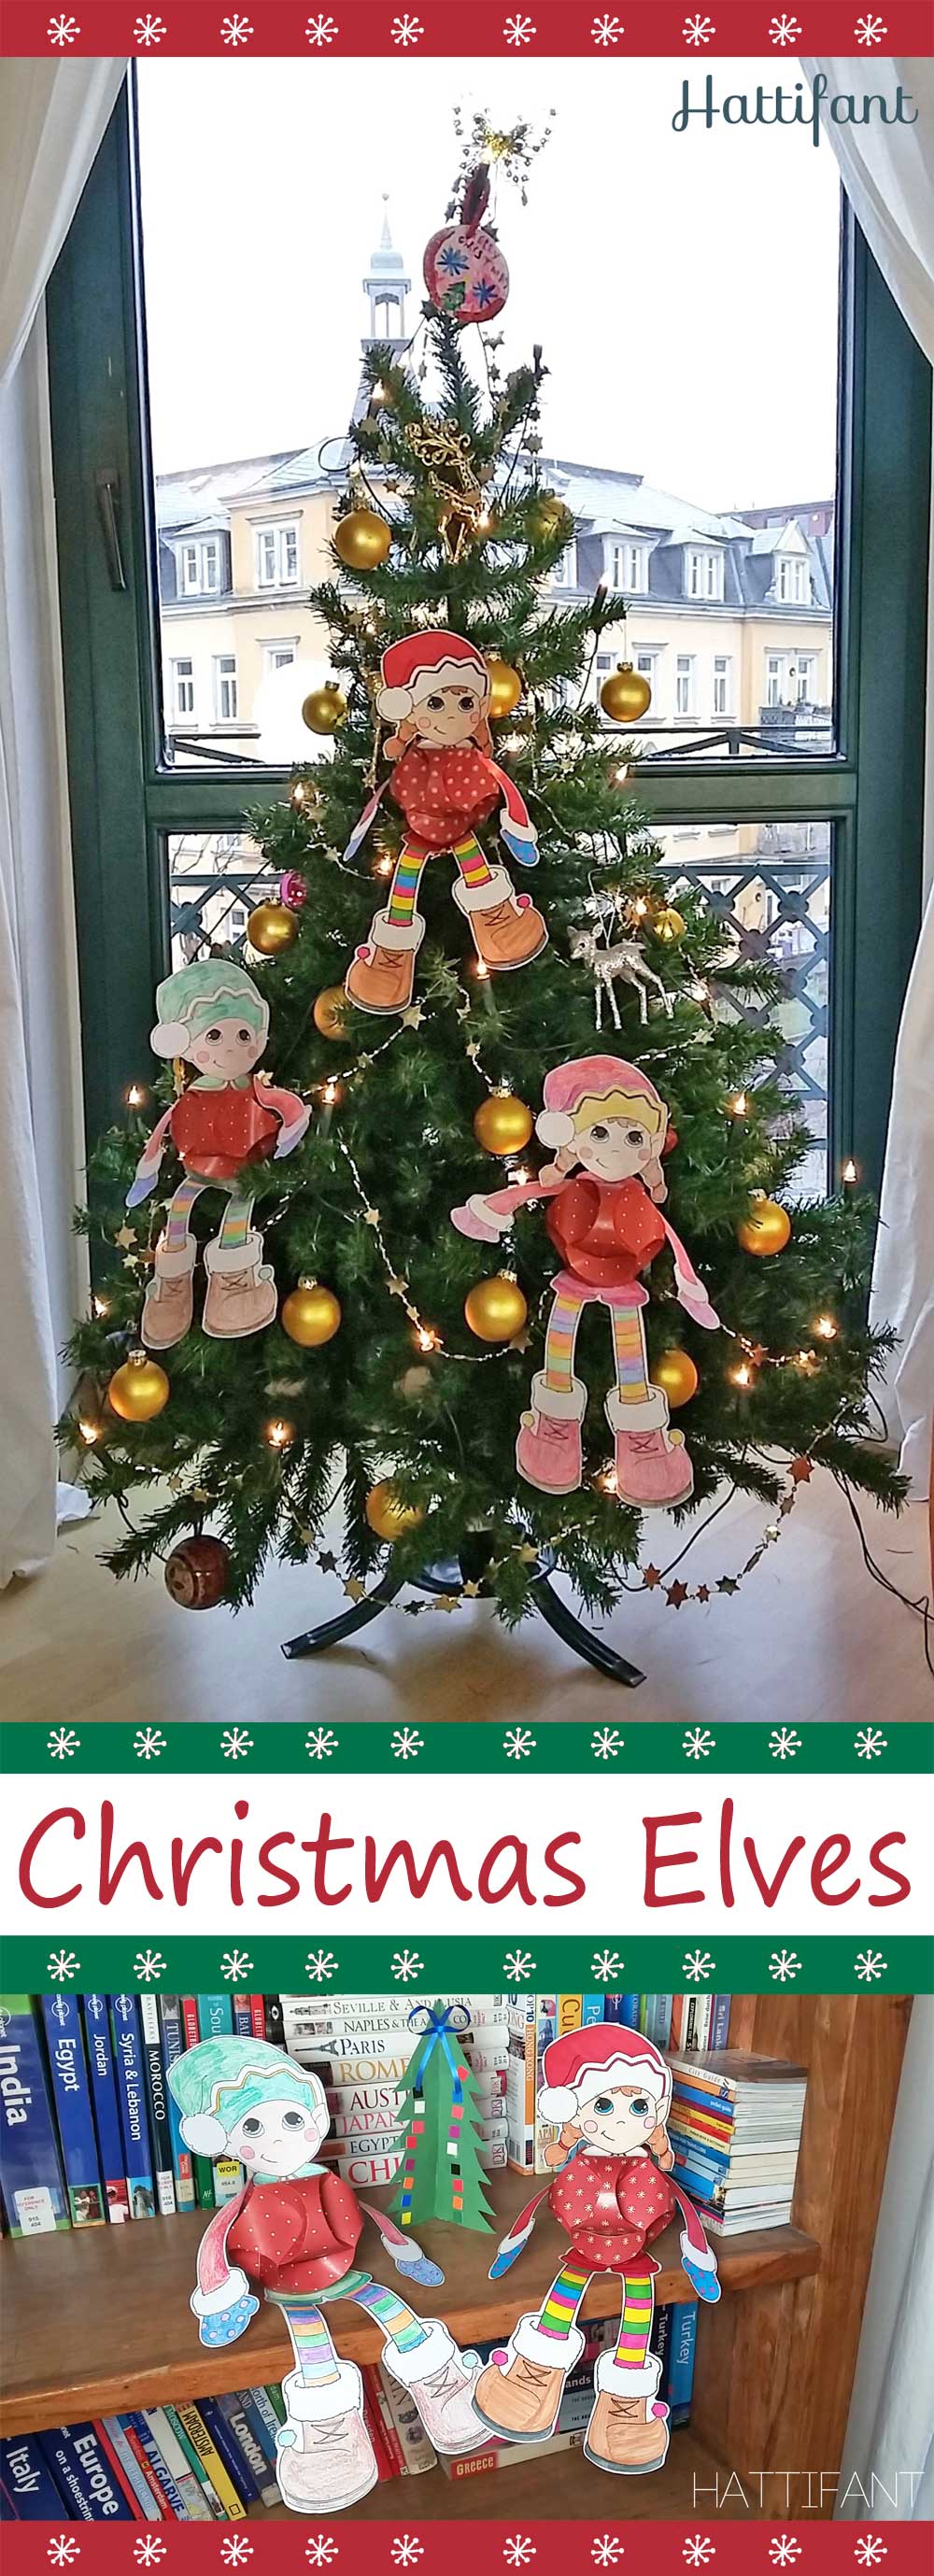 Hattifant's Christmas Elves with Triskele Paper Globes Papercraft